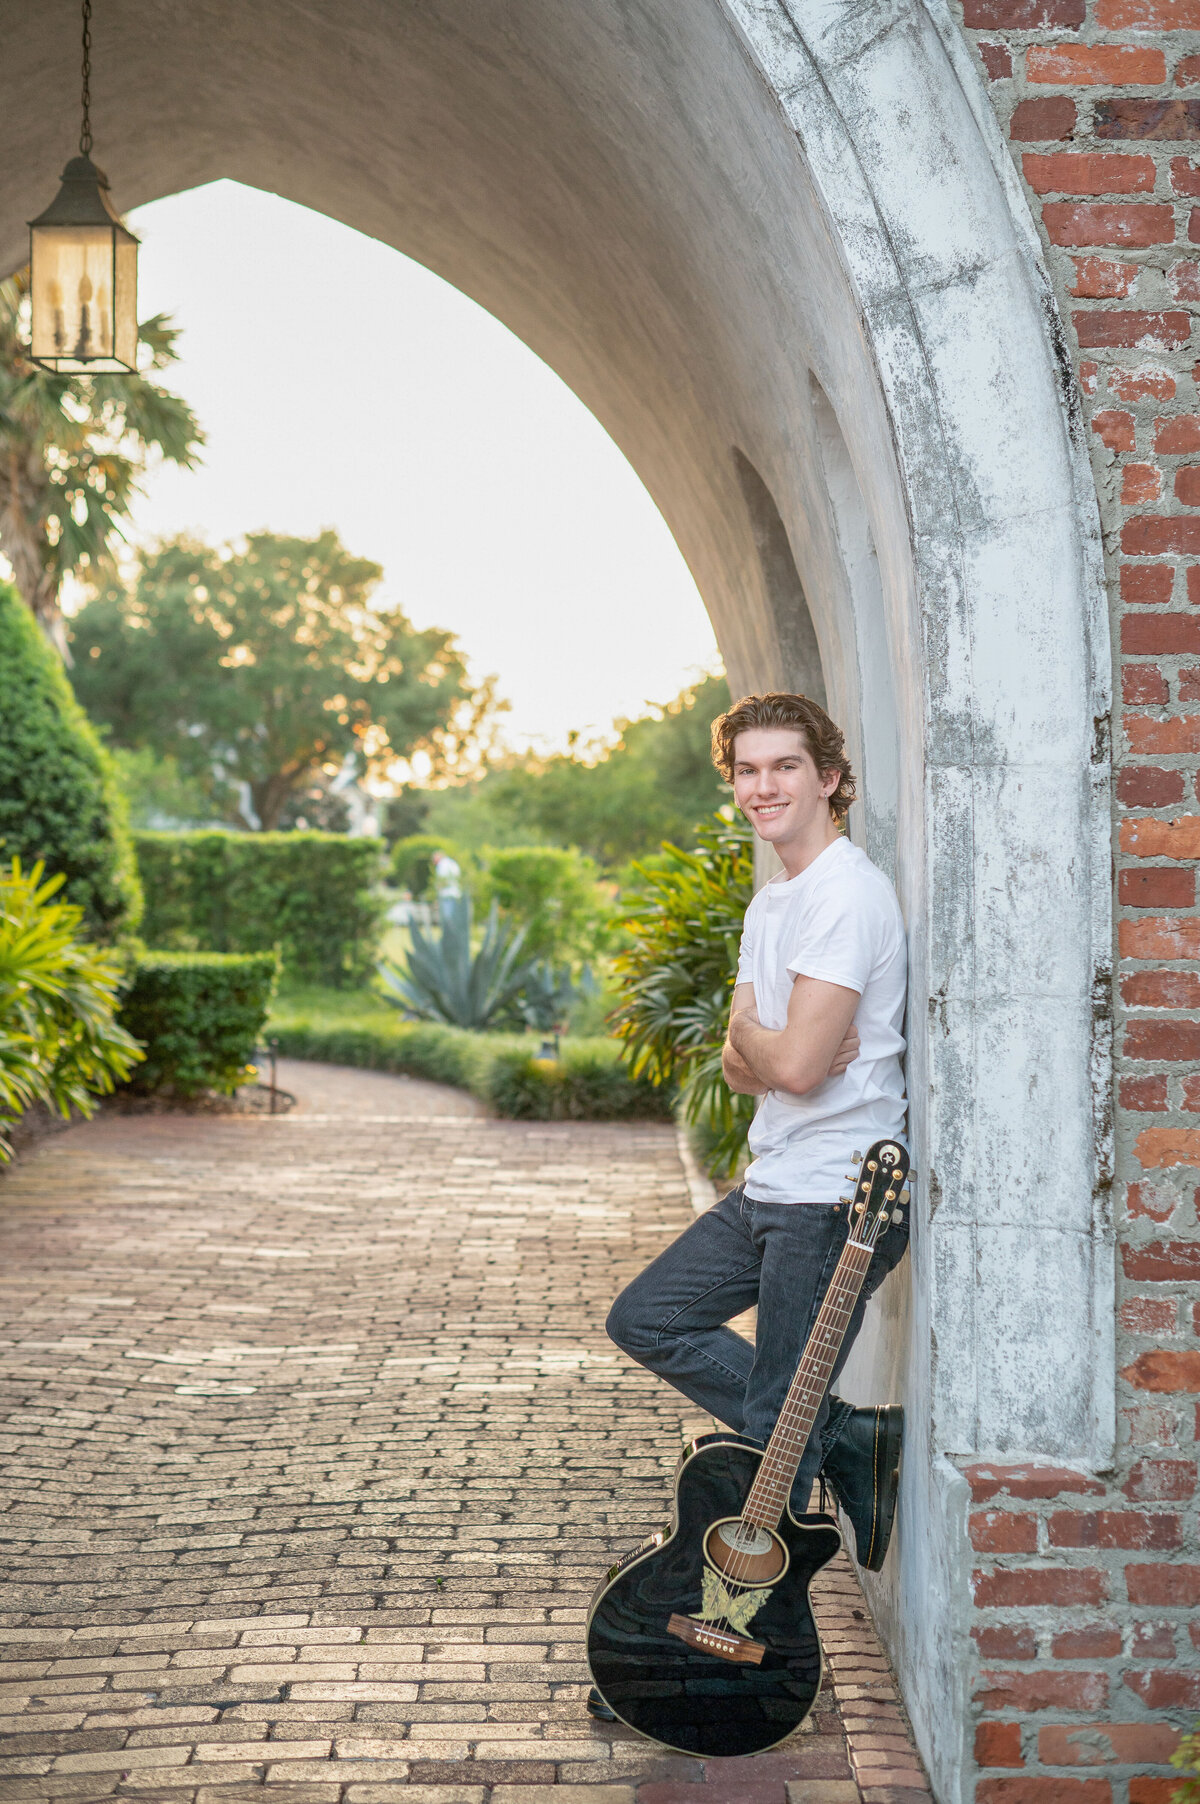 High school senior boy leaning against a stone archway with guitar in front of him smiling.